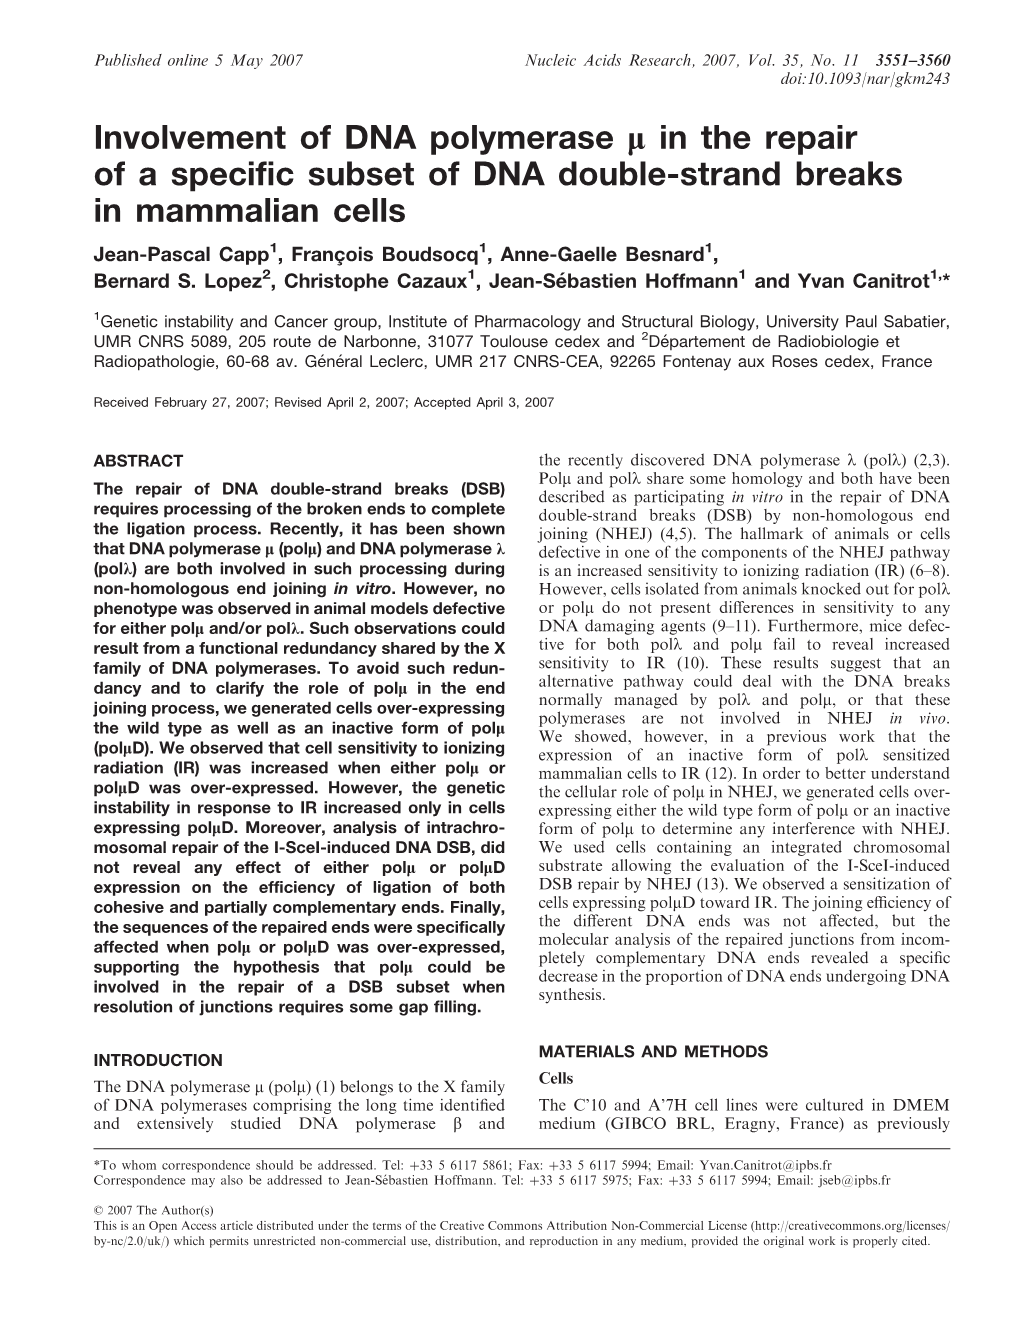 Involvement of DNA Polymerase K in the Repair of a Specific Subset of DNA Double-Strand Breaks in Mammalian Cells